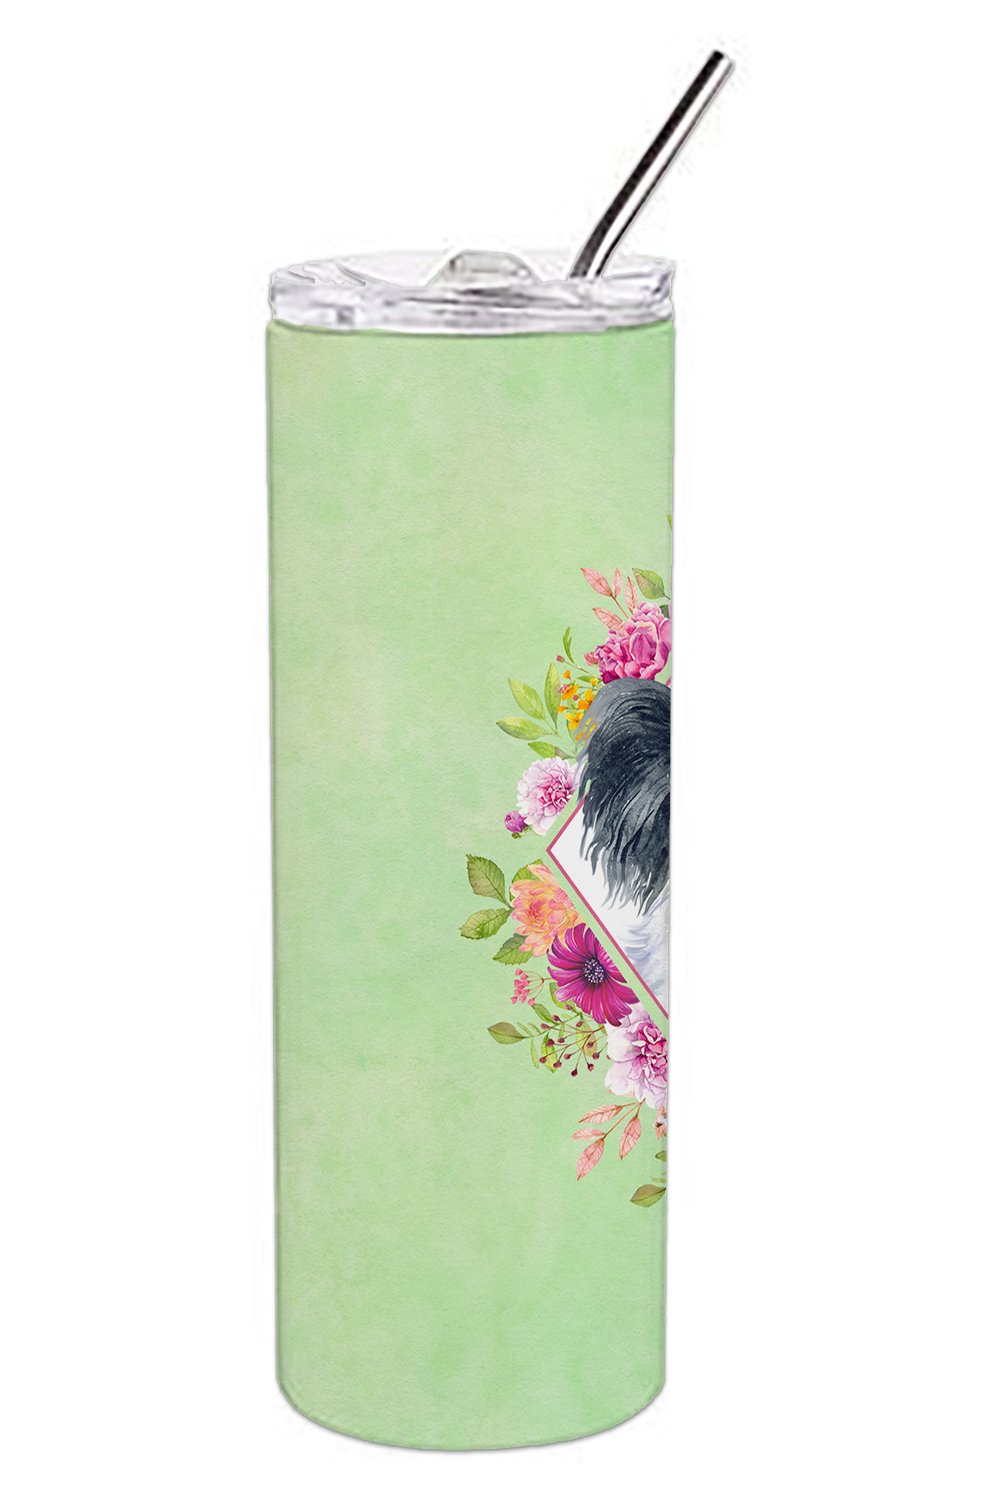 Papillon Green Flowers Double Walled Stainless Steel 20 oz Skinny Tumbler CK4325TBL20 by Caroline's Treasures